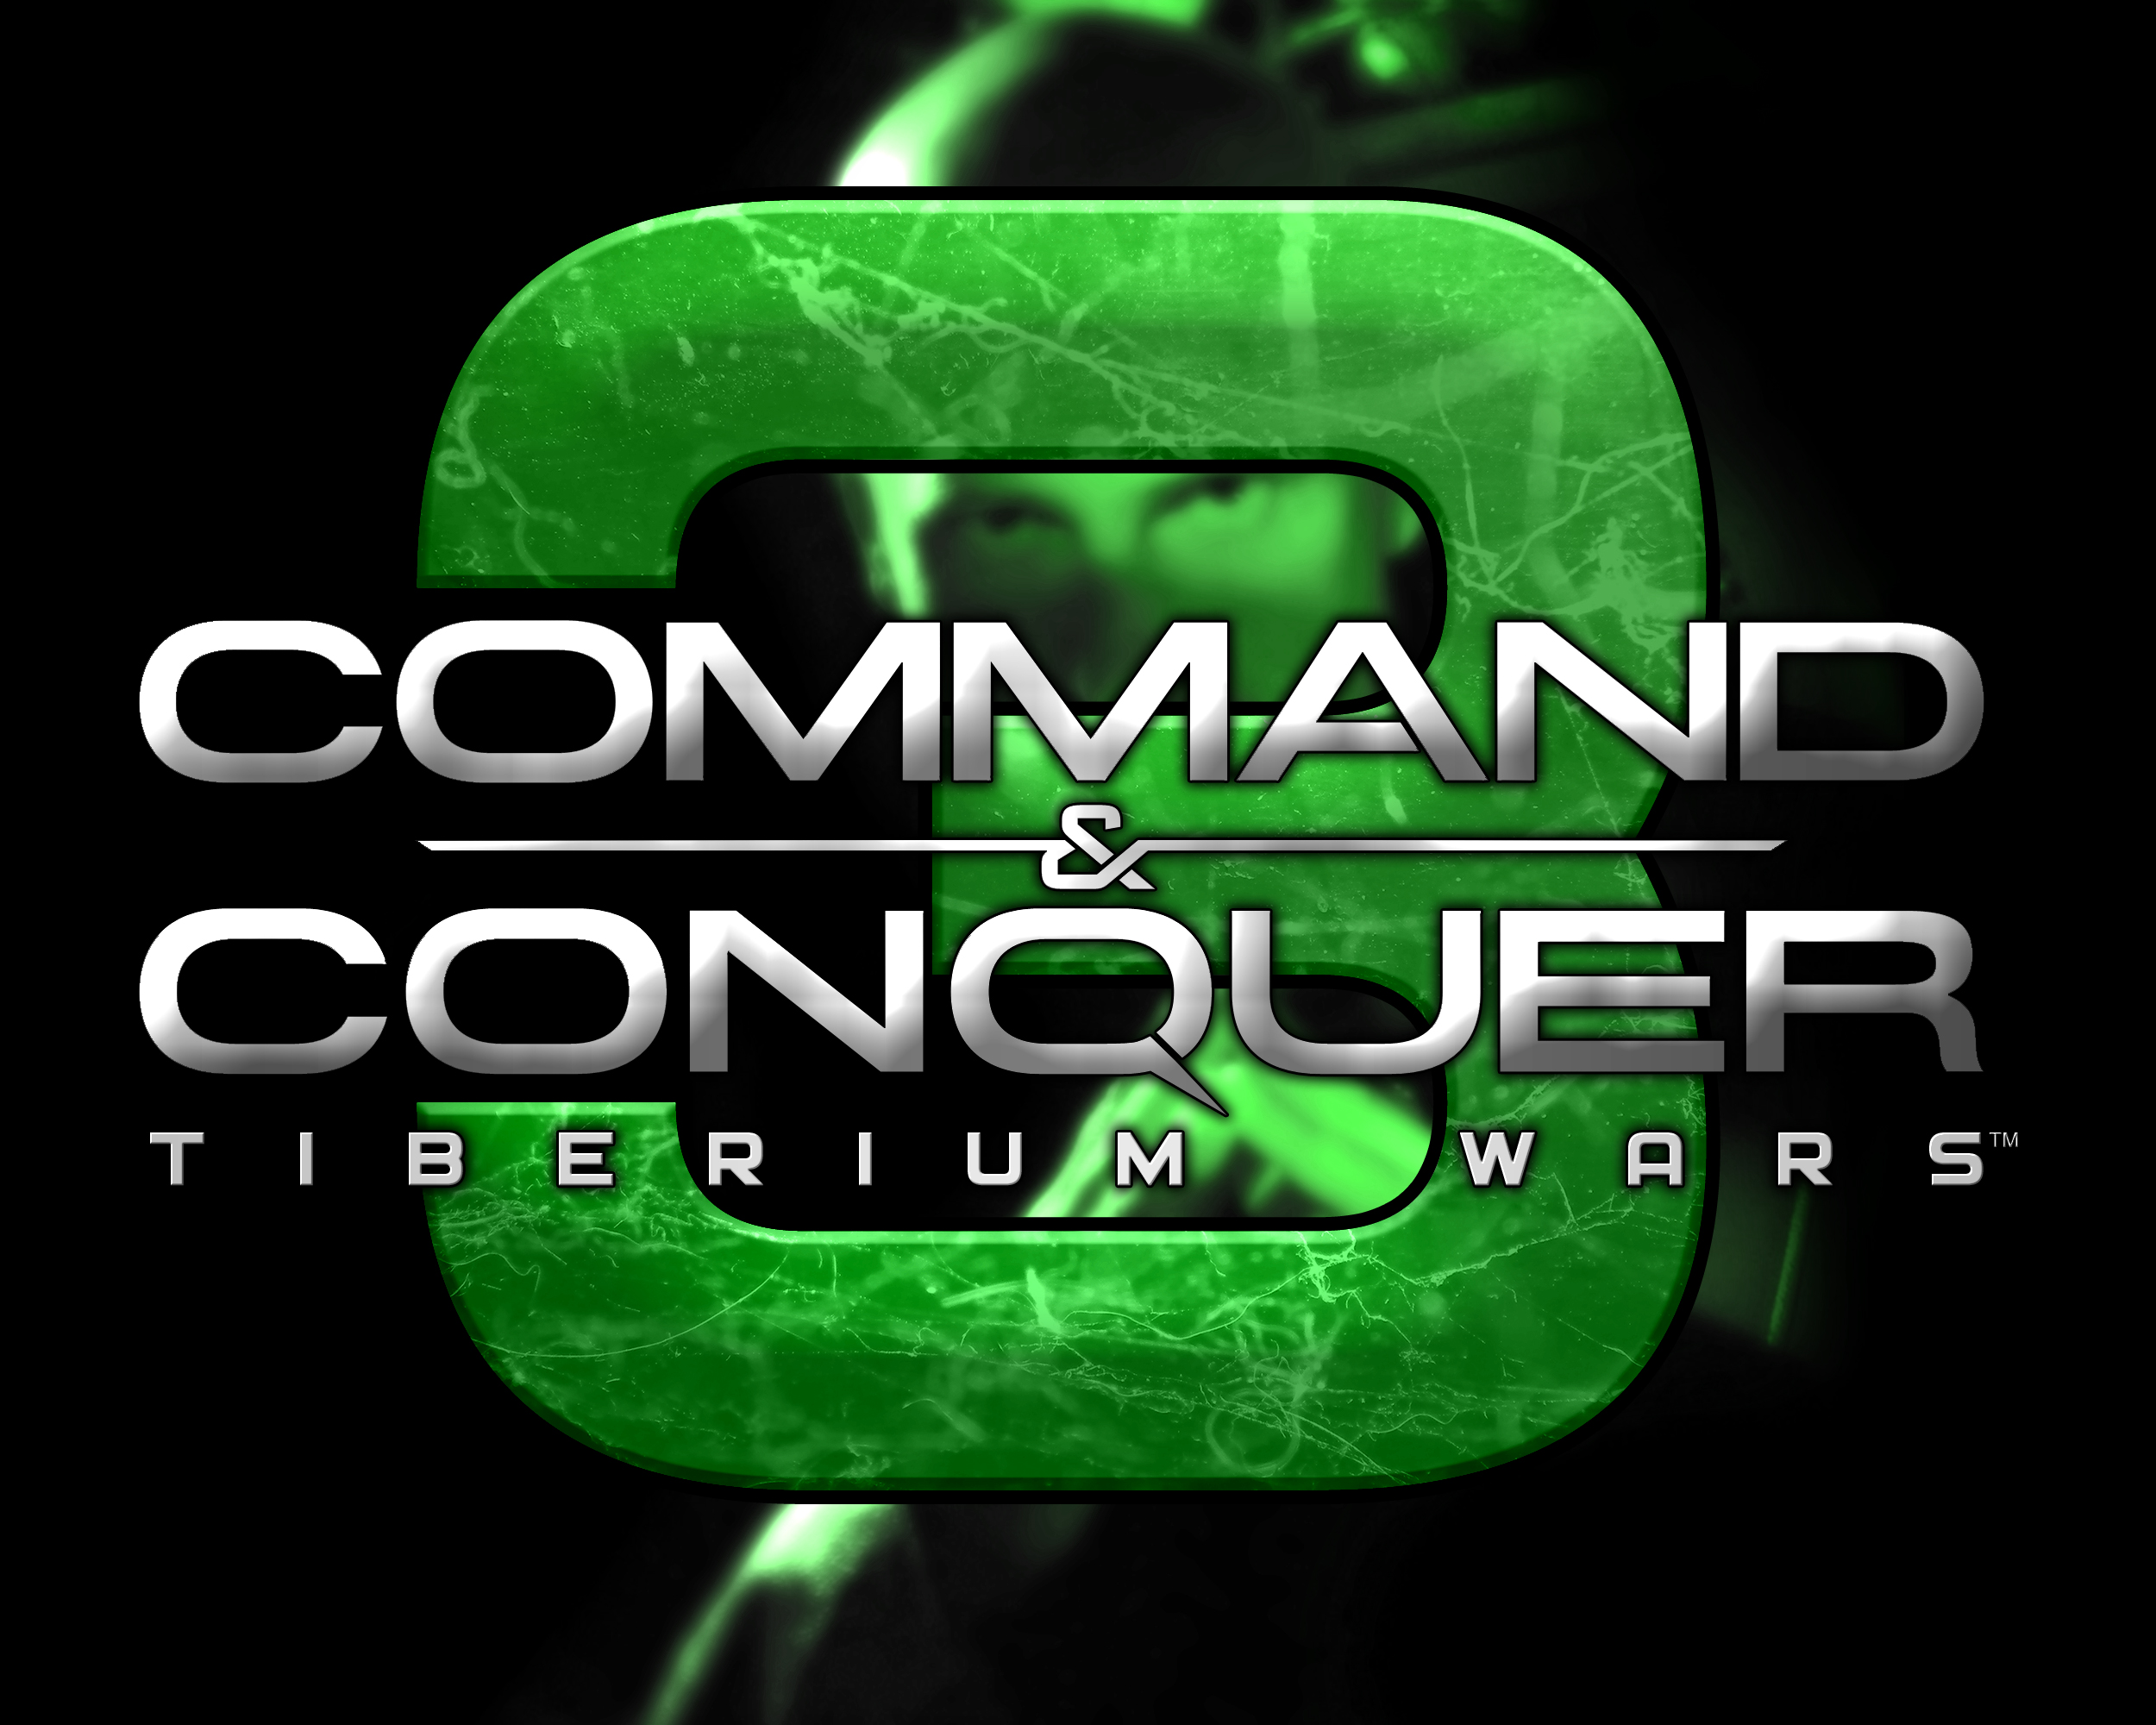 Command And Conquer 3 Tiberium Wars | НОД | Тройная угроза